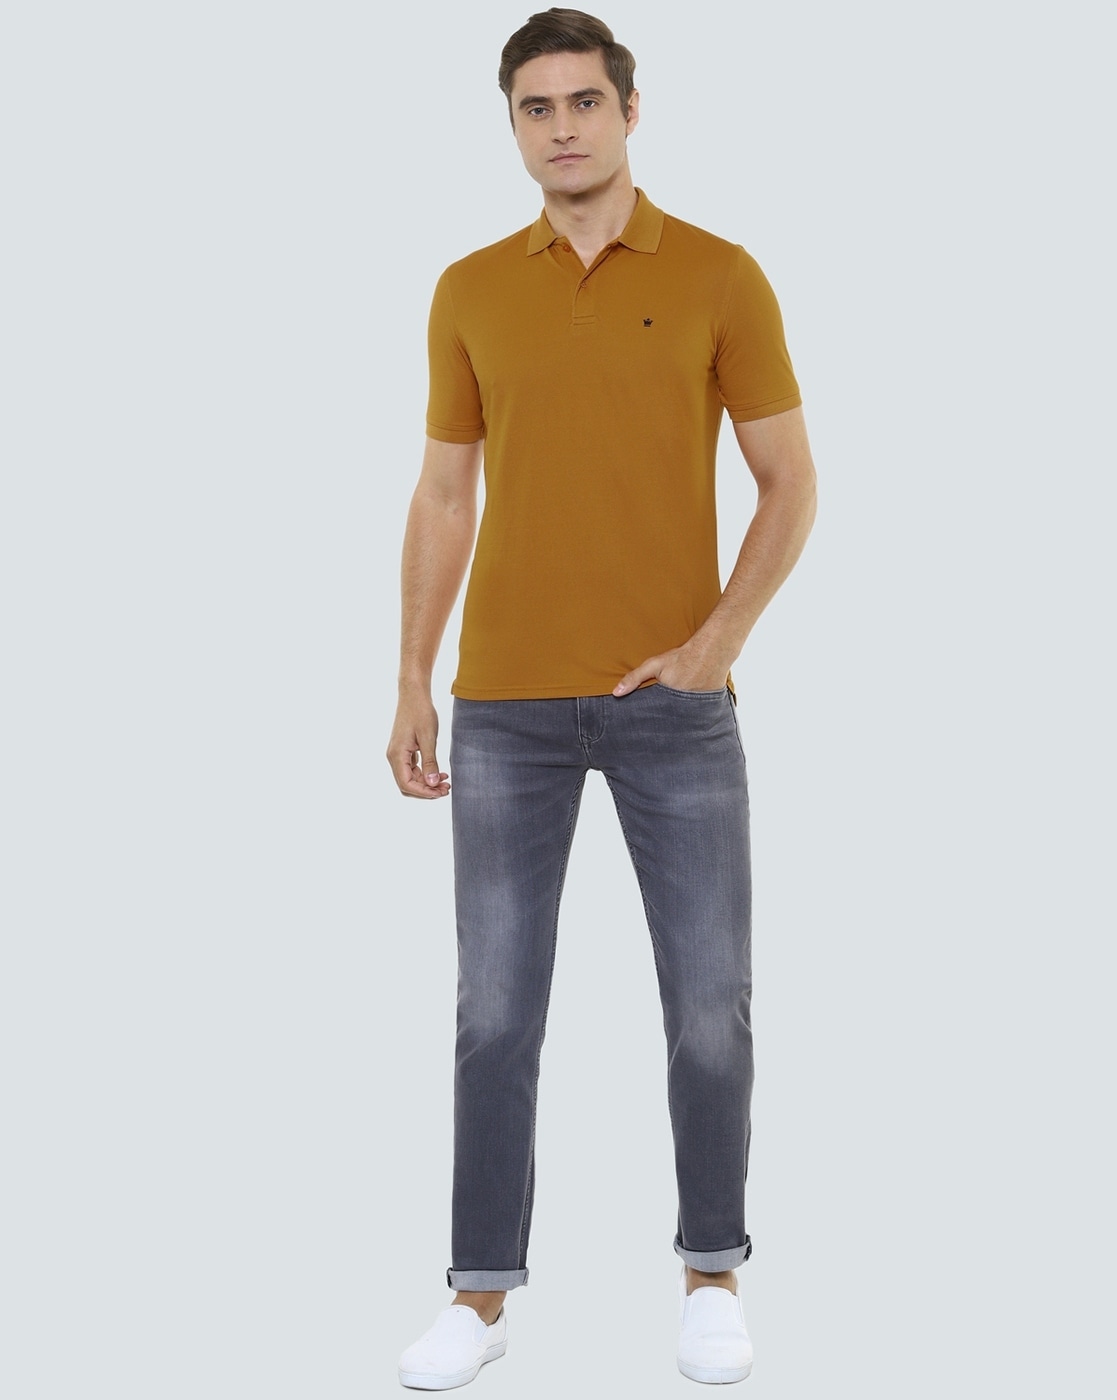 LOUIS PHILIPPE Printed Men Polo Neck Yellow T-Shirt - Buy LOUIS PHILIPPE  Printed Men Polo Neck Yellow T-Shirt Online at Best Prices in India